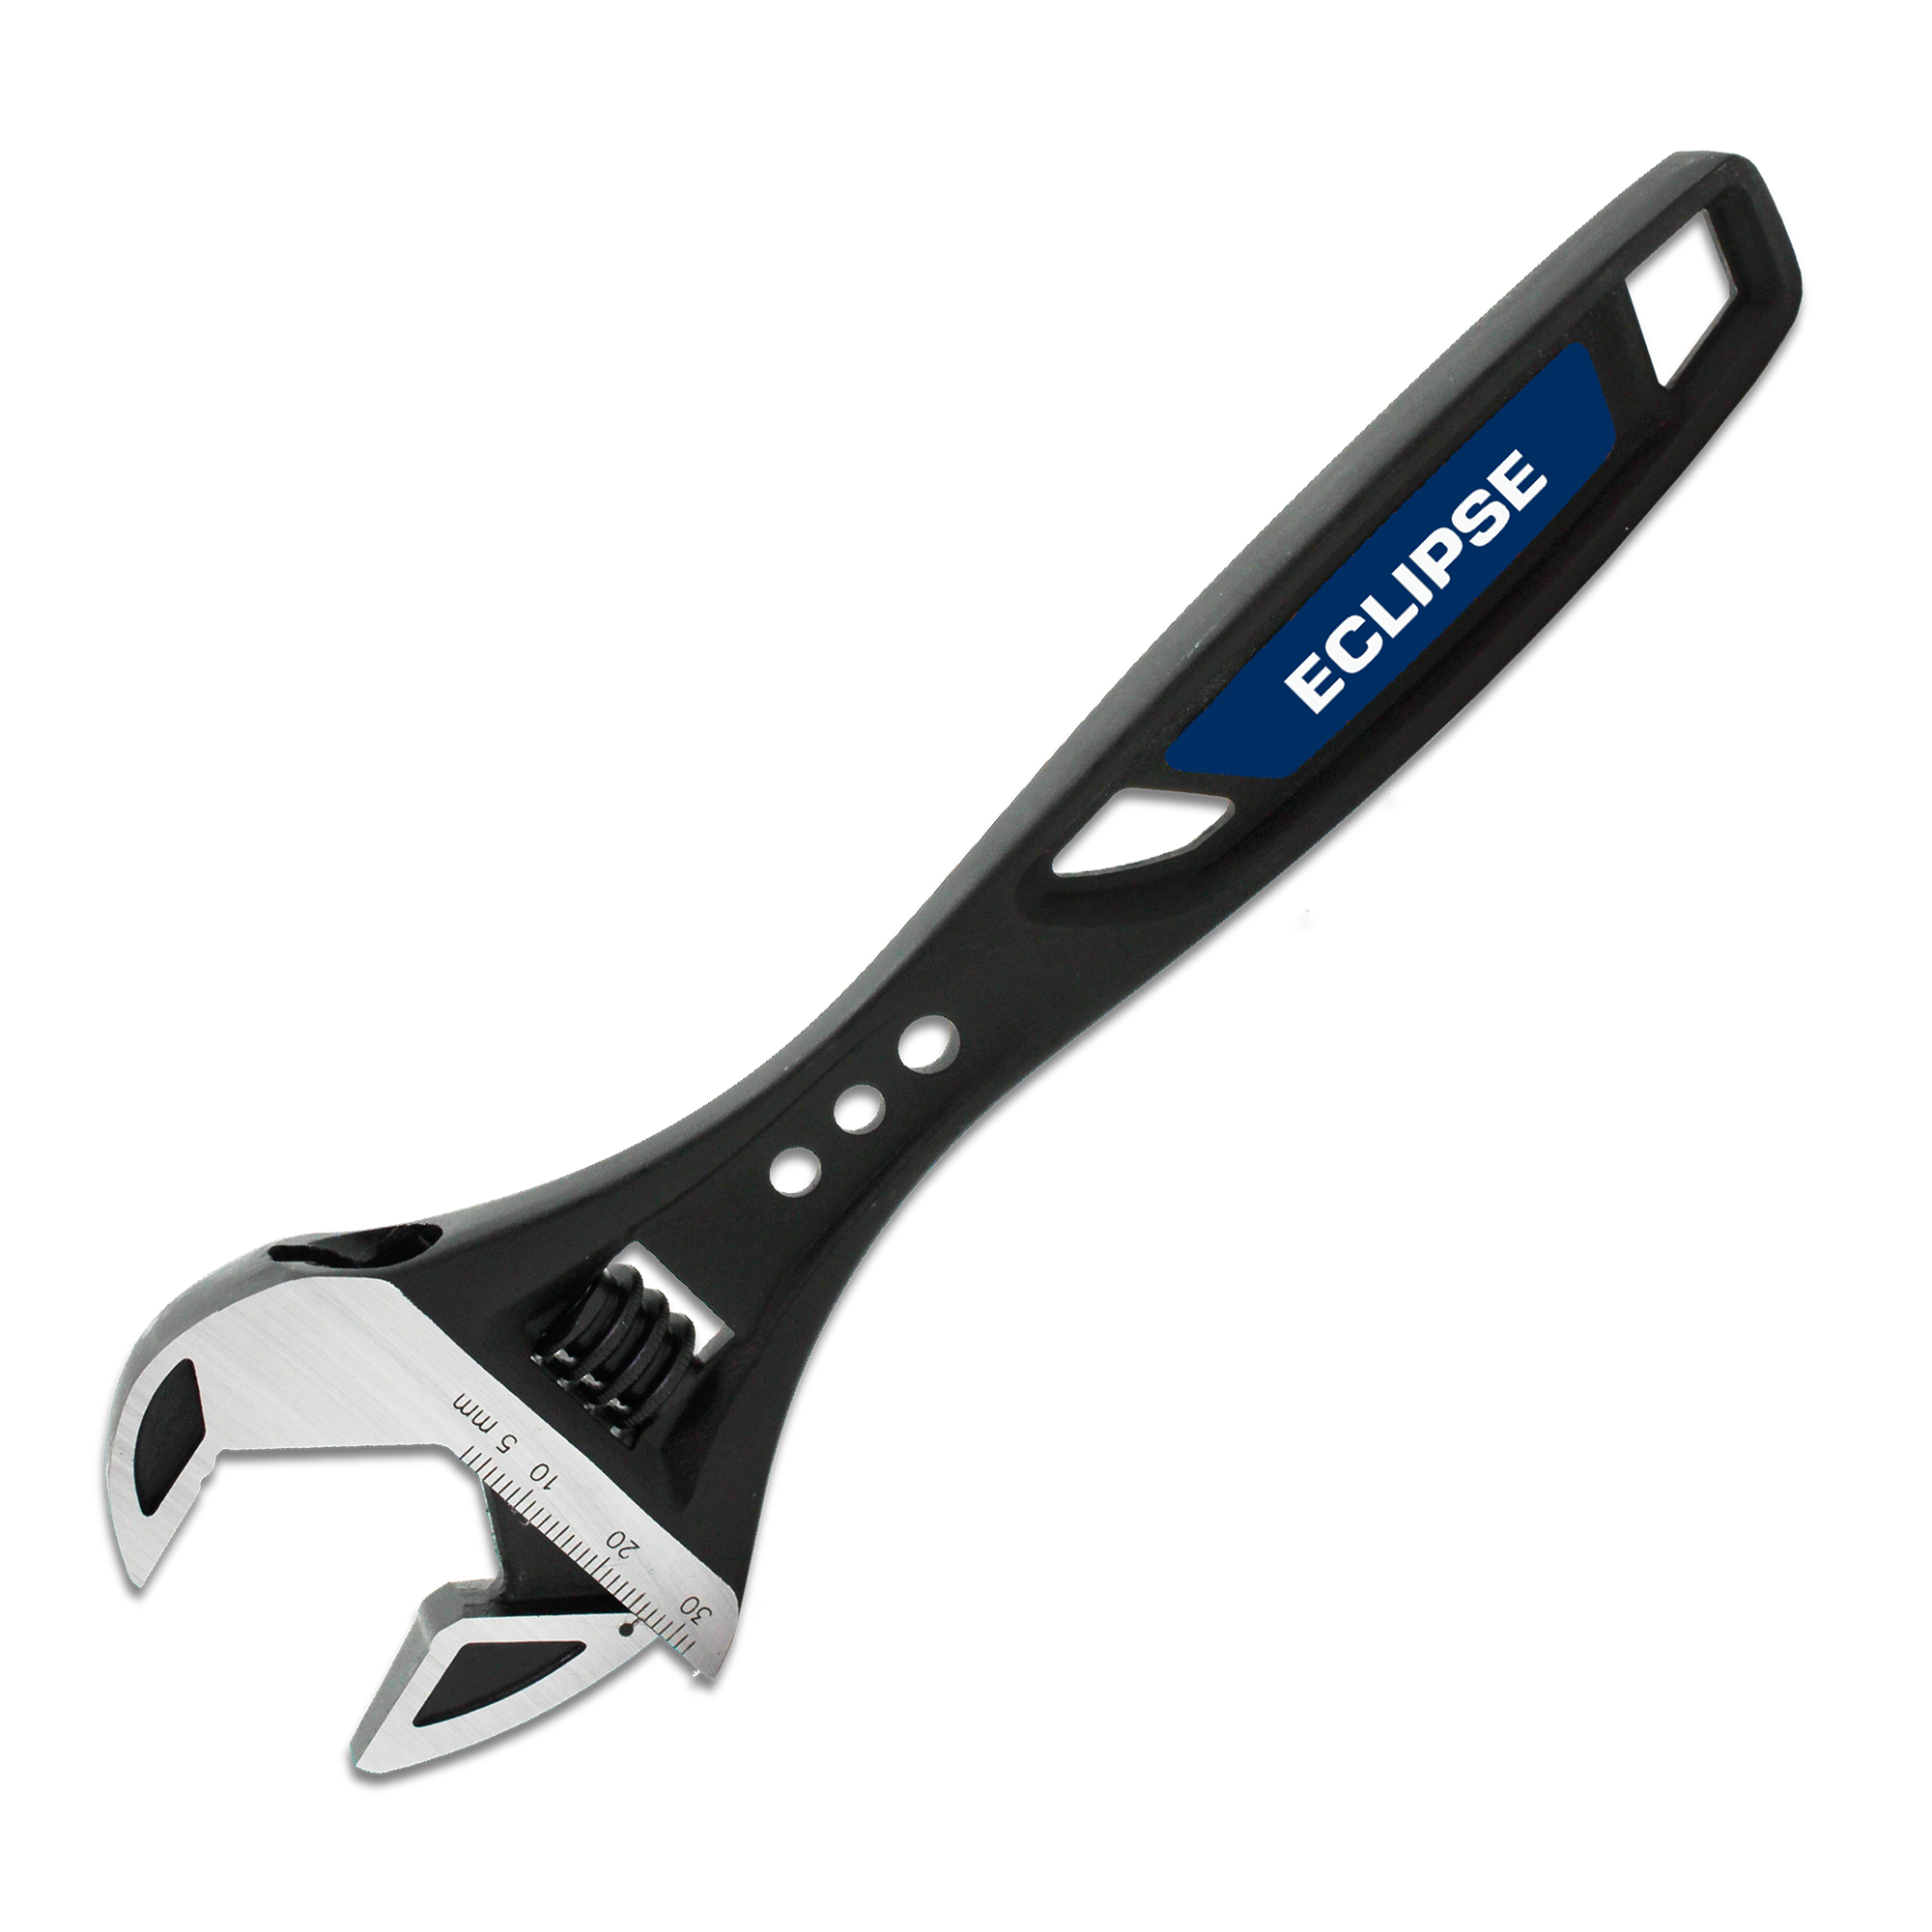 Tri Grip Adjustable Wrench by Eclipse